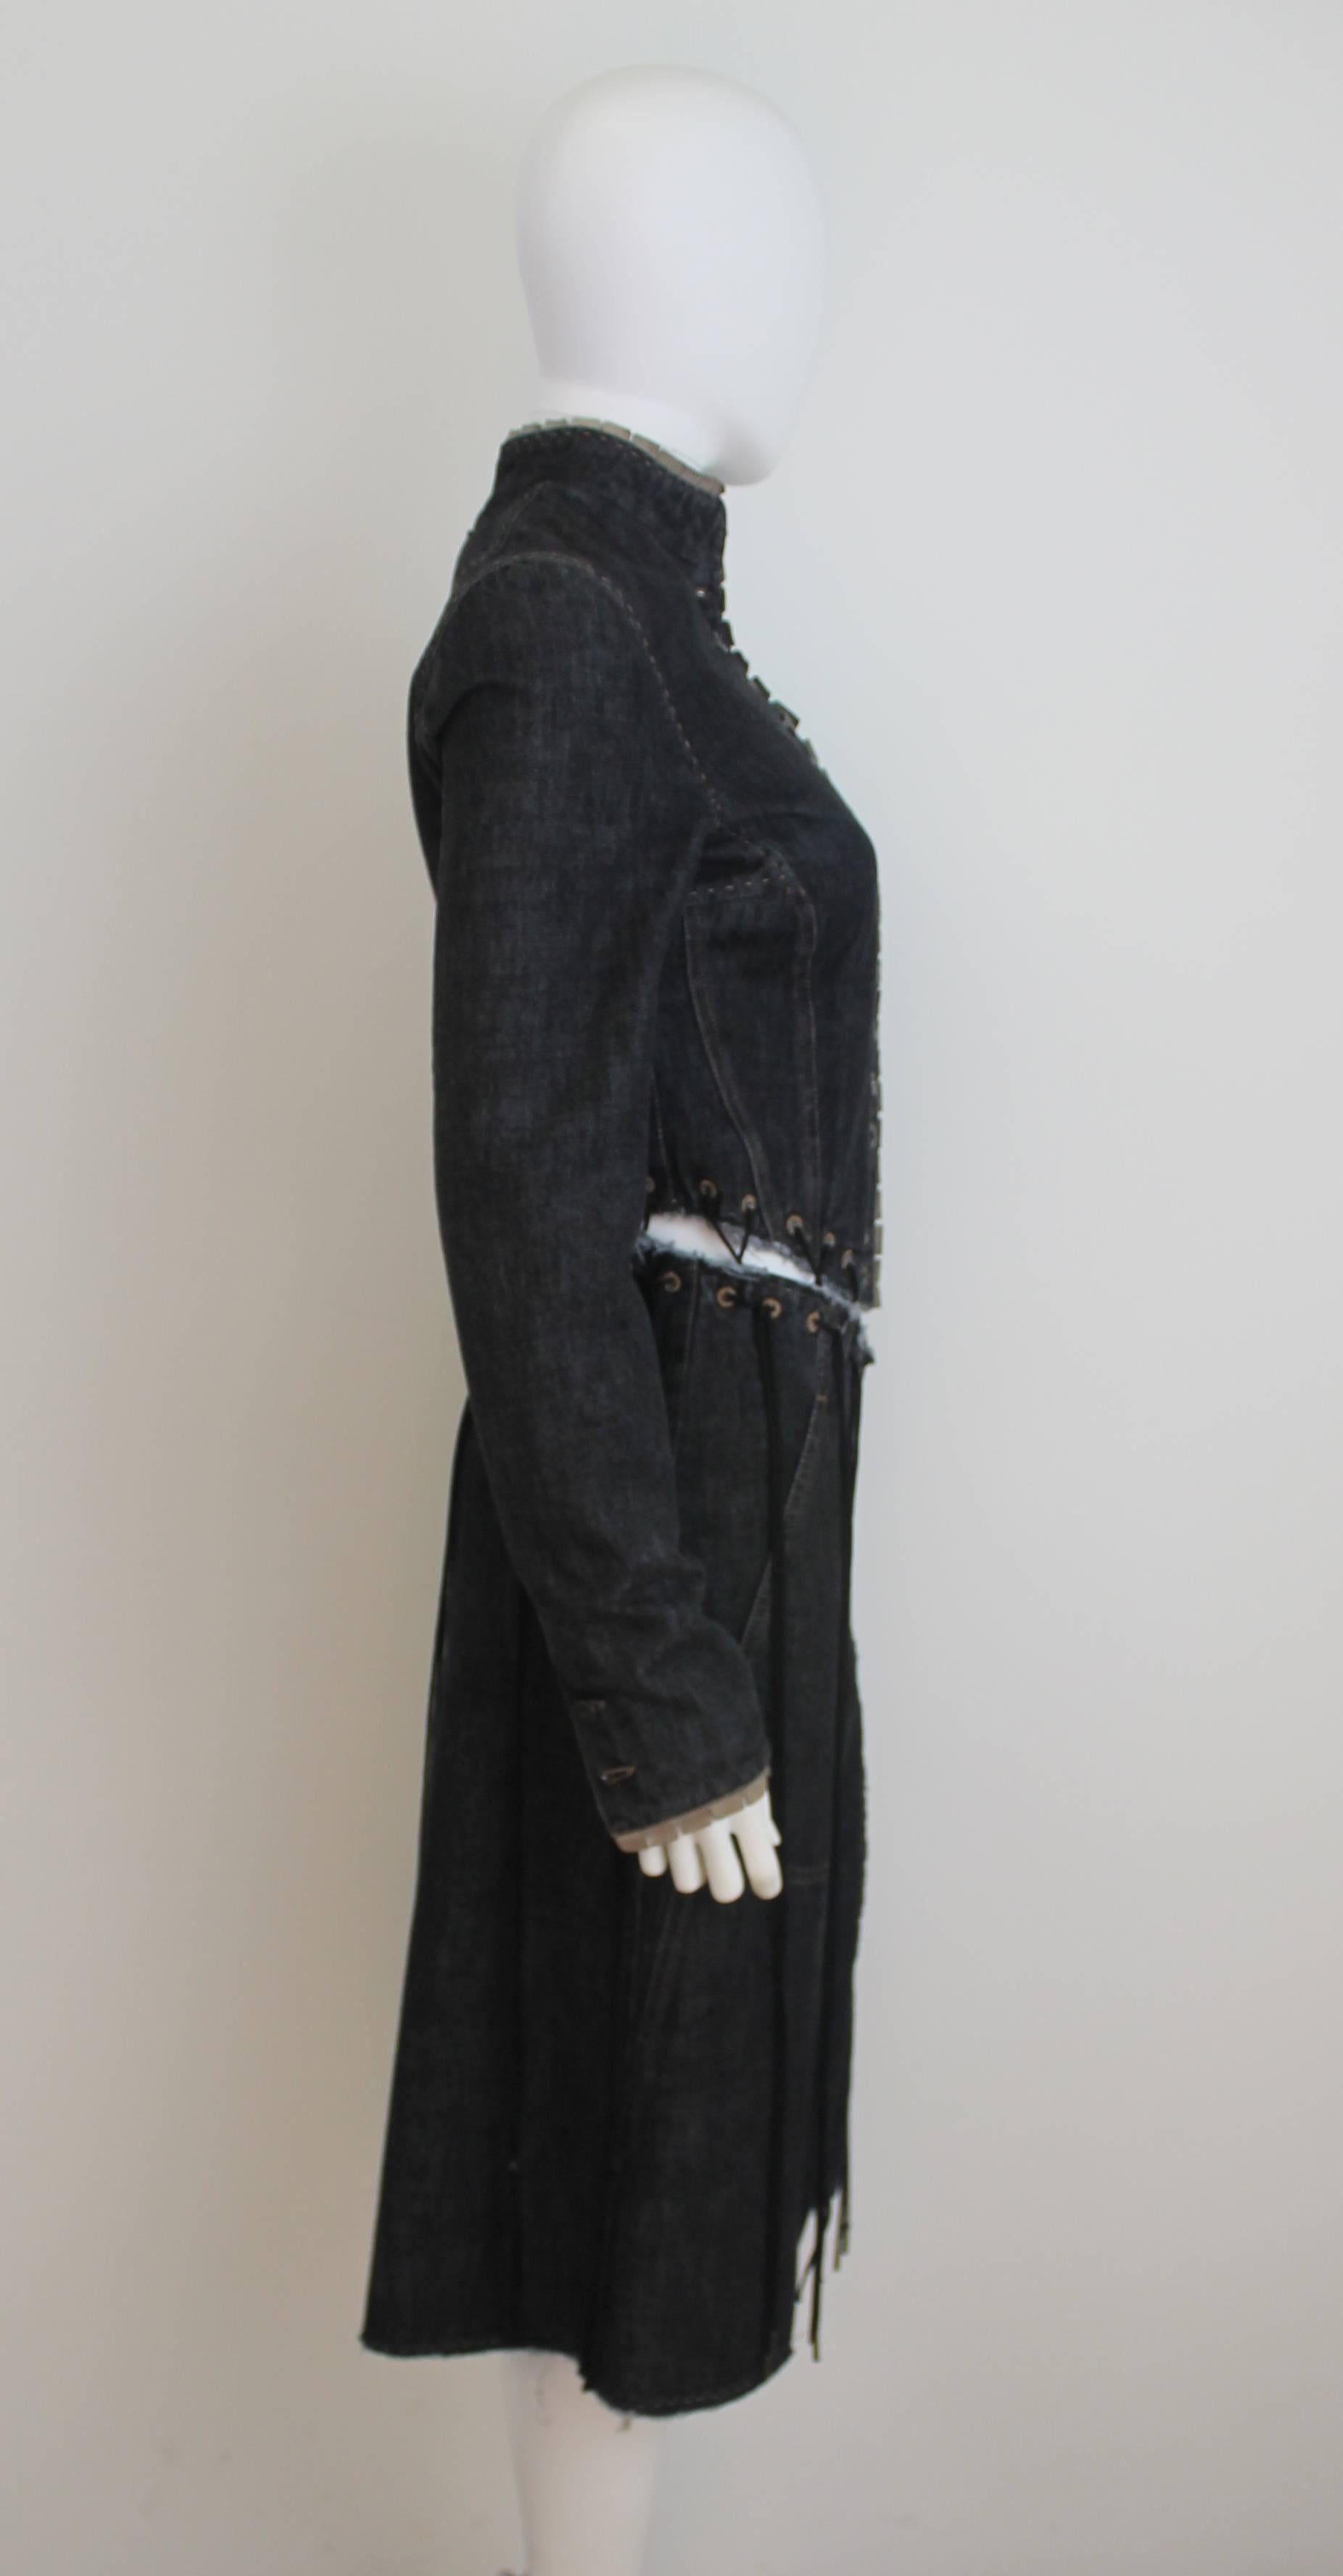 Rare and collectible Alexander McQueen dark grey denim structured dress from Spring/Summer 2003 iconic 